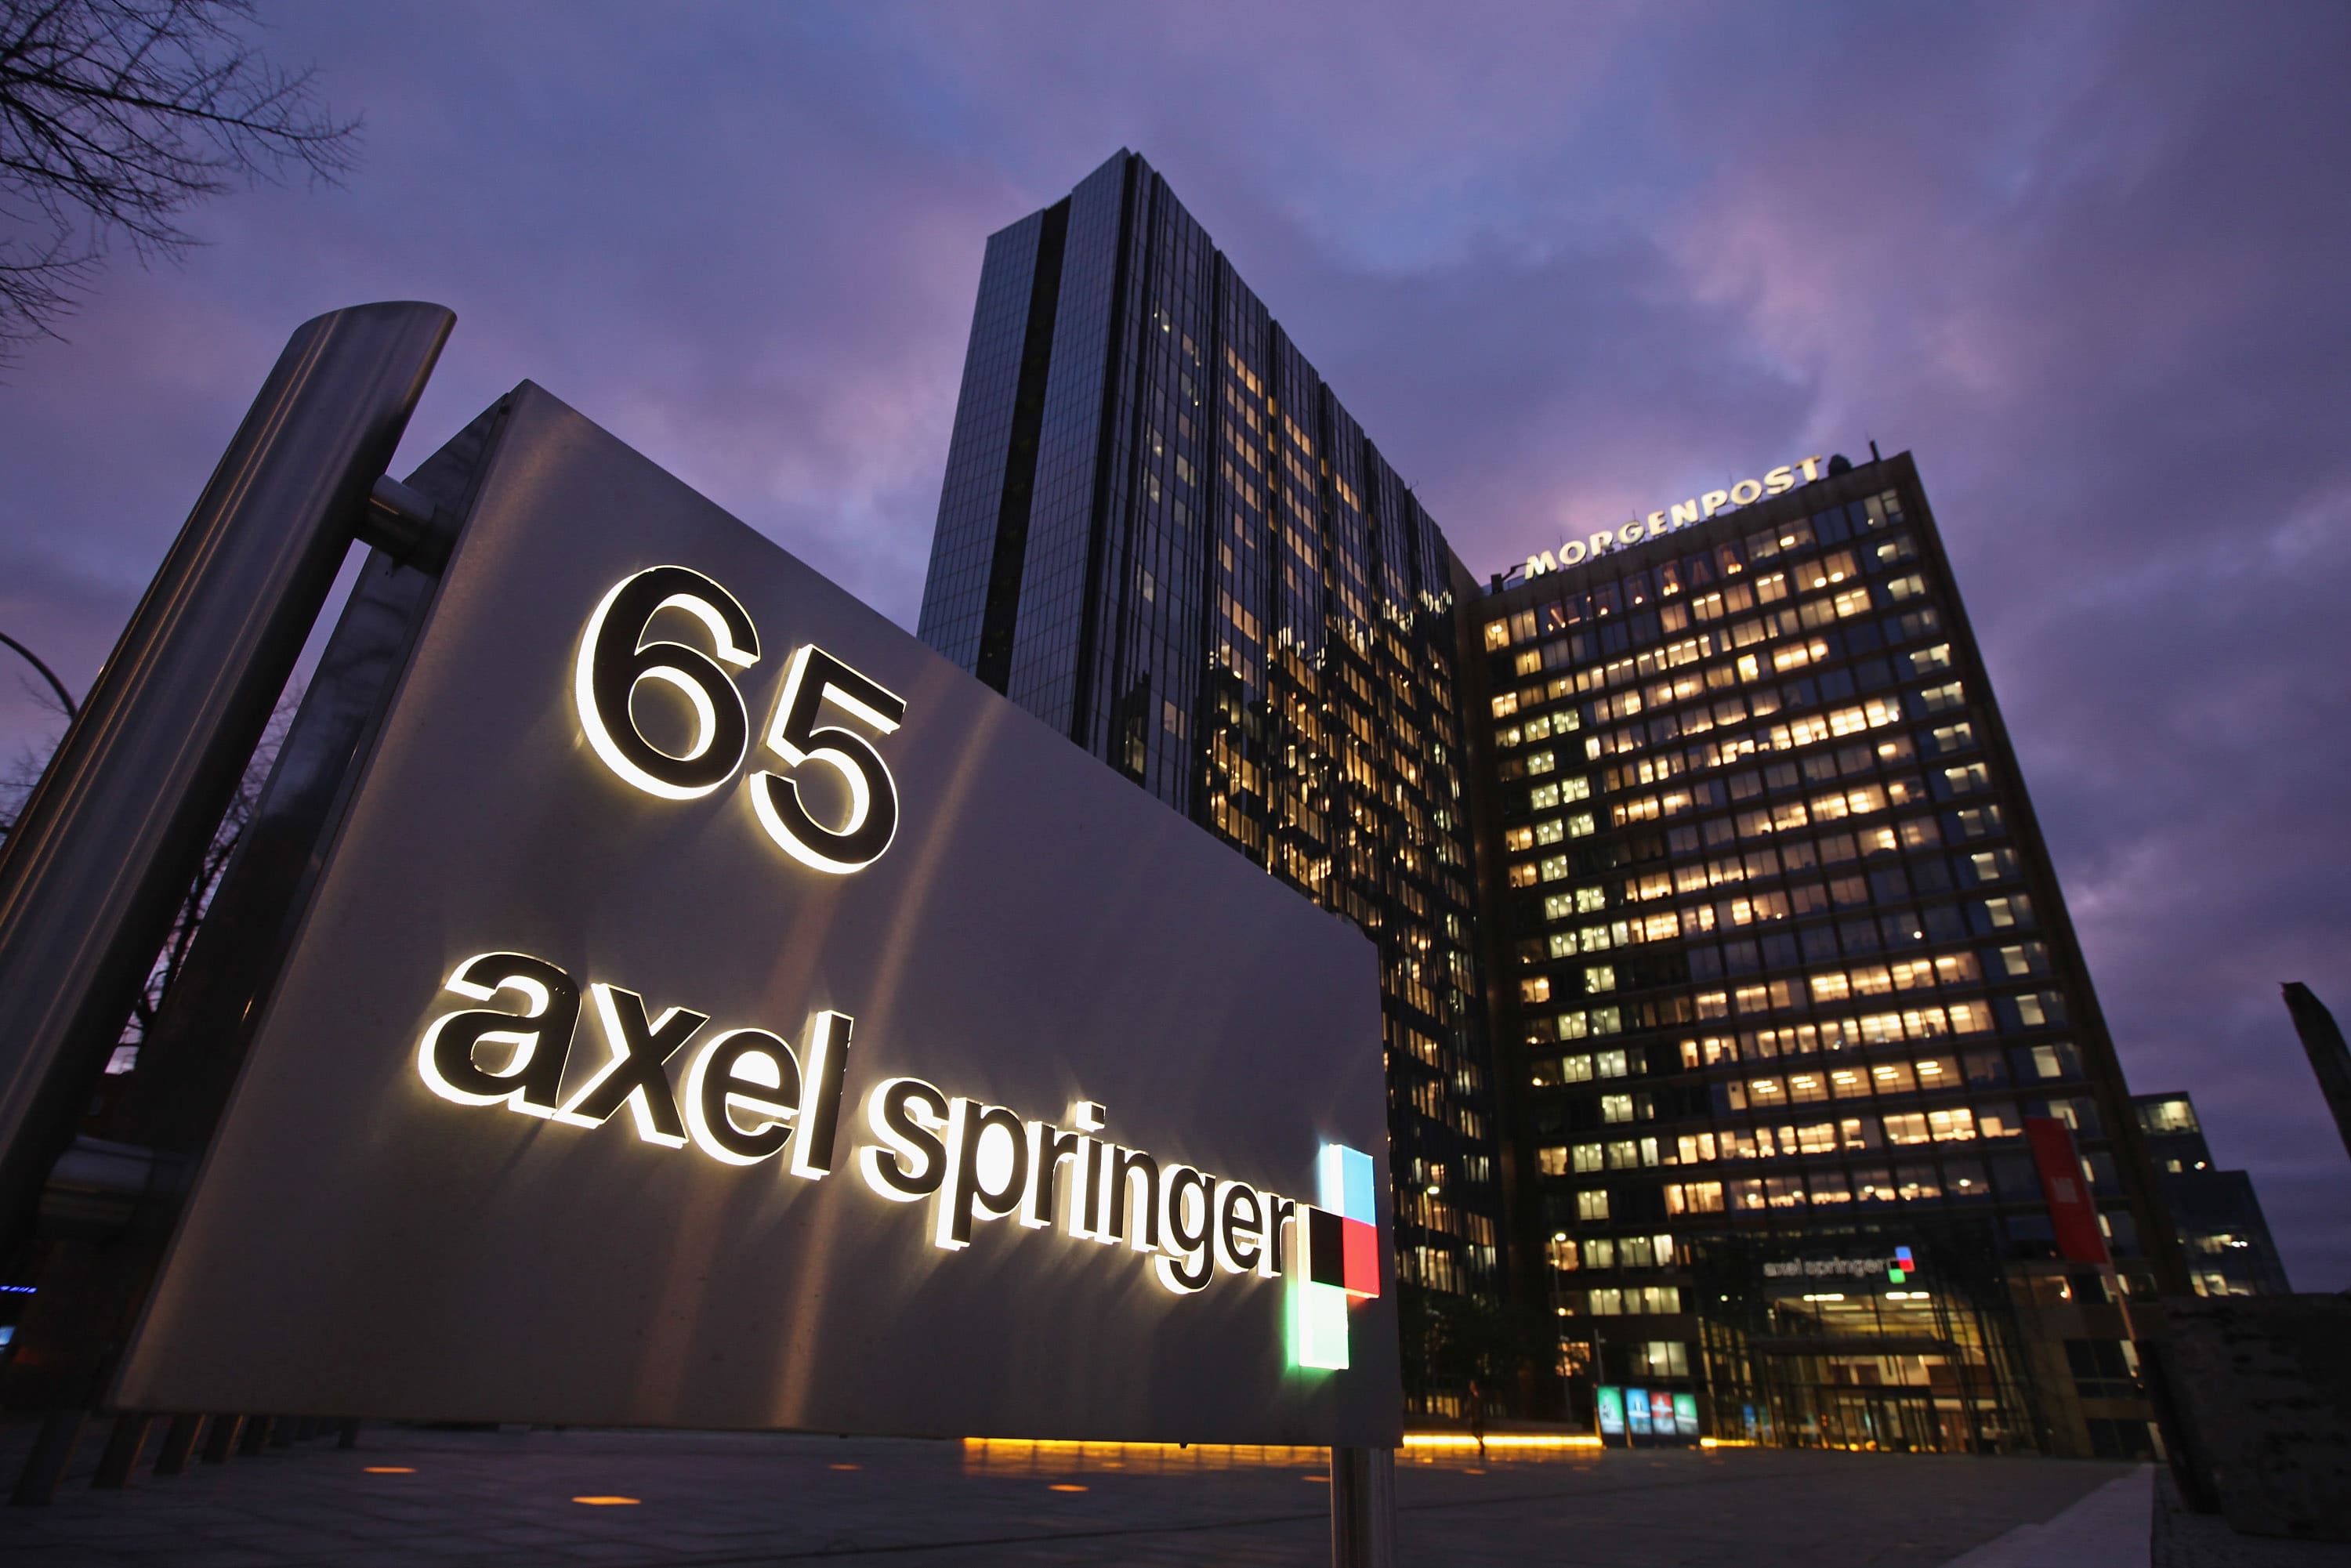 Politico sells to German publishing giant Axel Springer in deal worth about $1 billion